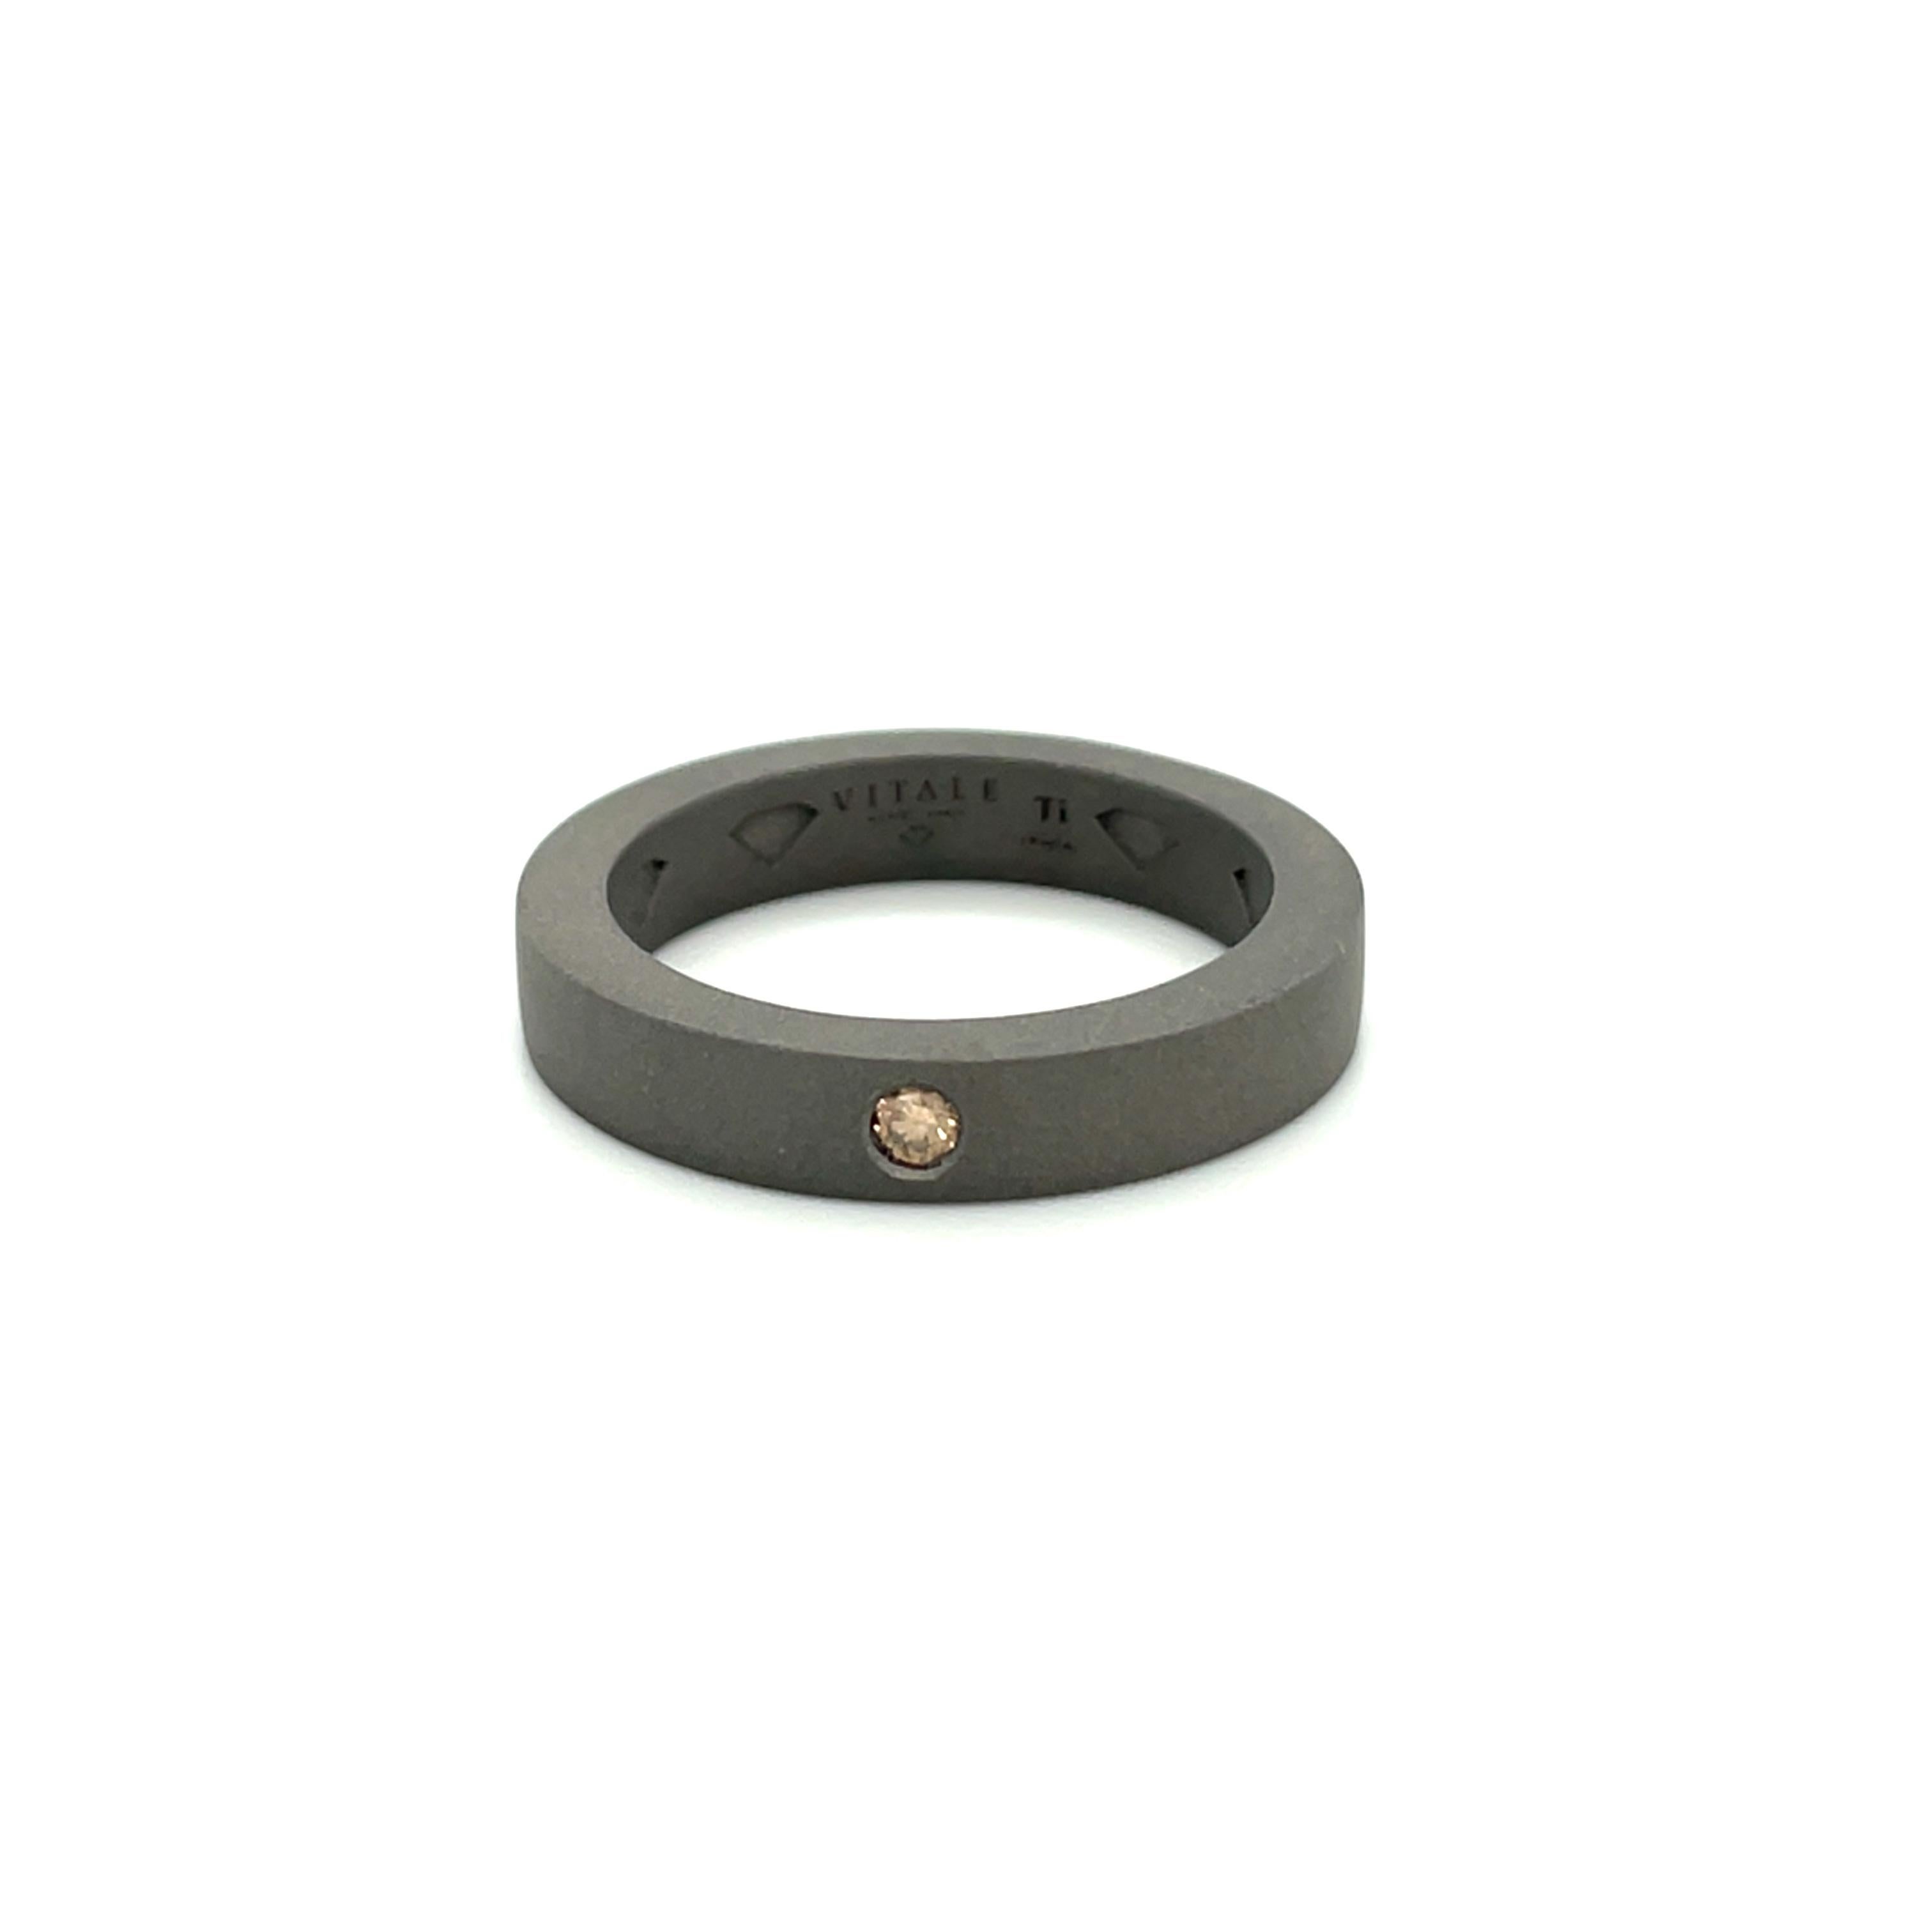 Titanium band ring is from our Heroes Collection. This masculine ring is decorated by round brown diamond in total of 0.05 Carat. The ring size is 60mm/9 US size and it is not resizable. Perfect for stylish look!

The men’s collection is a